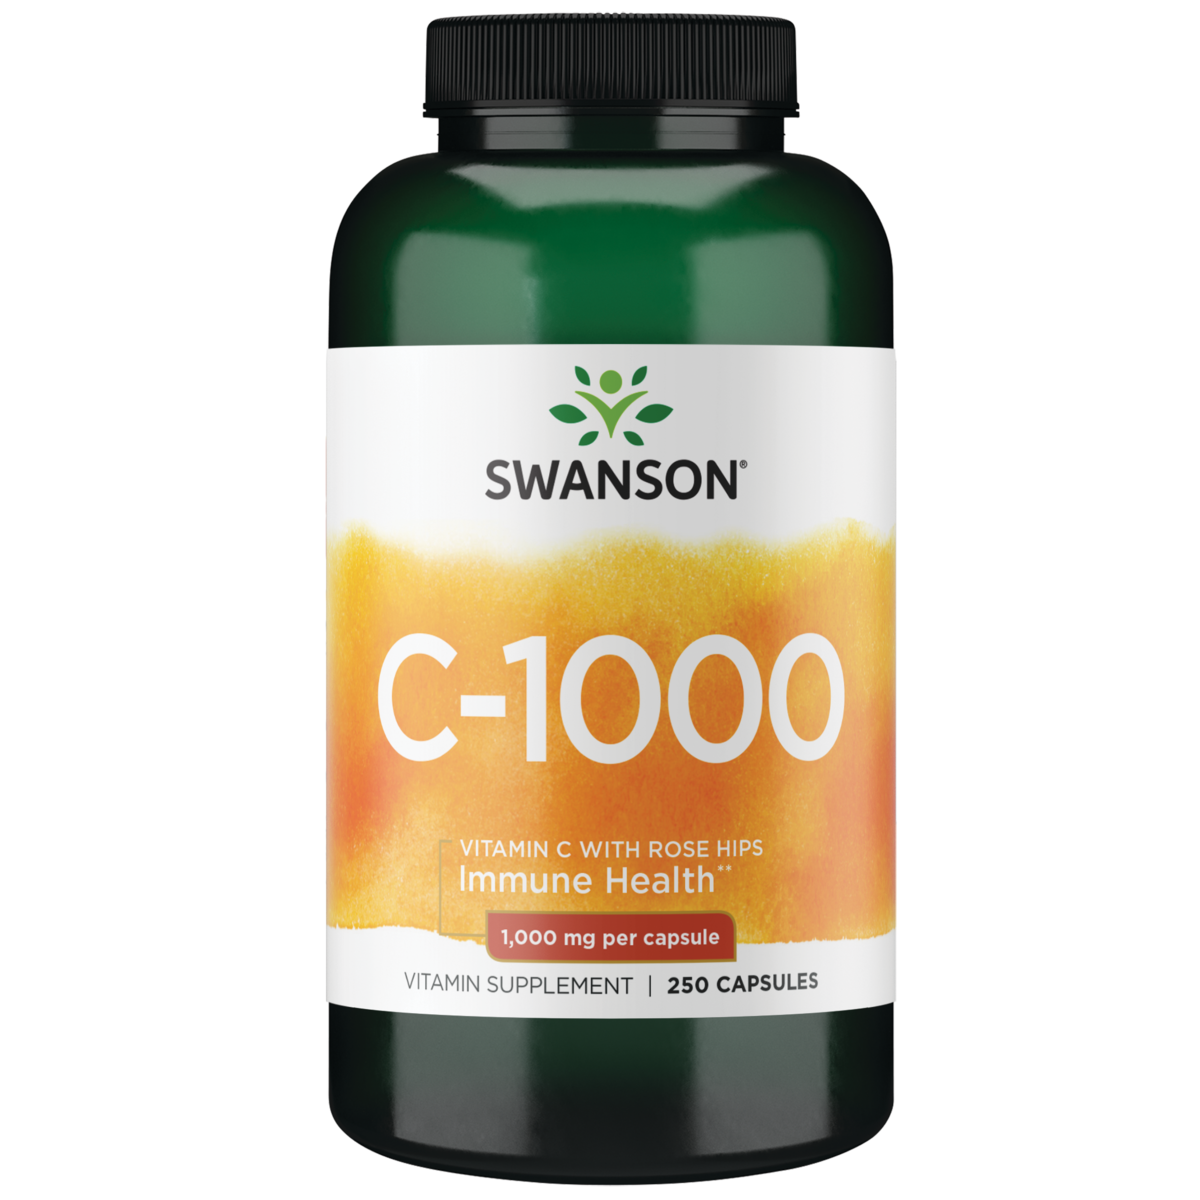 Swanson Vitamin C with Rose Hips Capsules, 1,000 mg, 250 Count - image 1 of 5